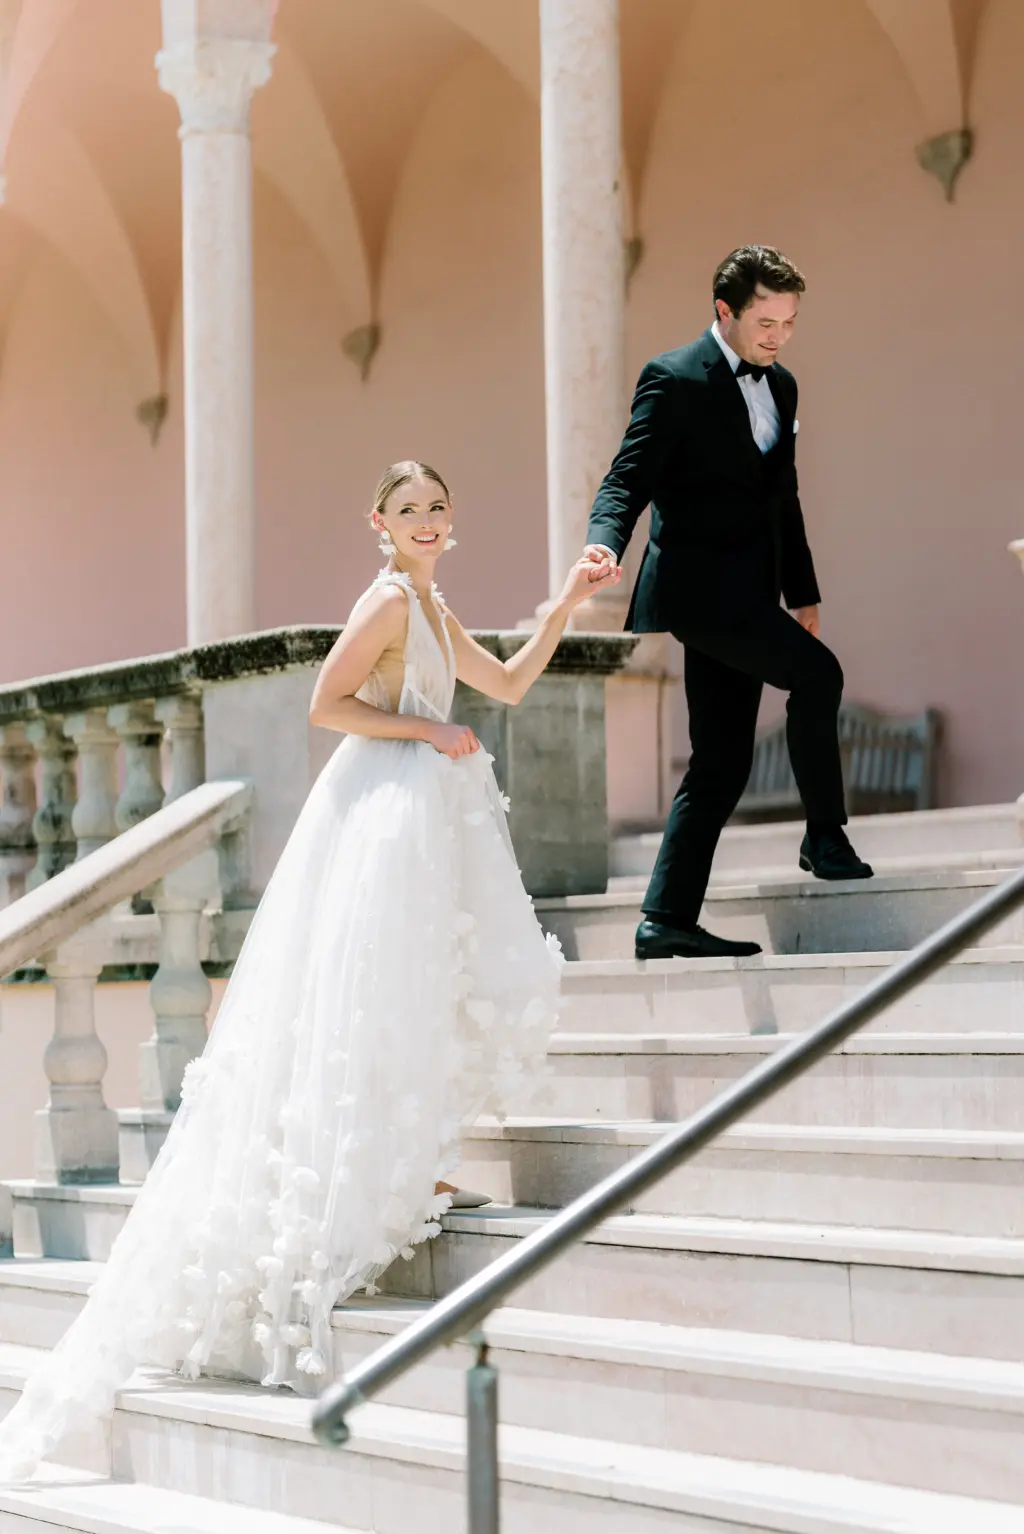 Bride and Groom Walking up Stairs Wedding Portrait | Sarasota Photographer Amber Yonker Photography | Venue The Ringling Museum | White Tulle Deep V Neckline, A-Line Marchesa Italian Wedding Dress with Floral Applique Inspiration